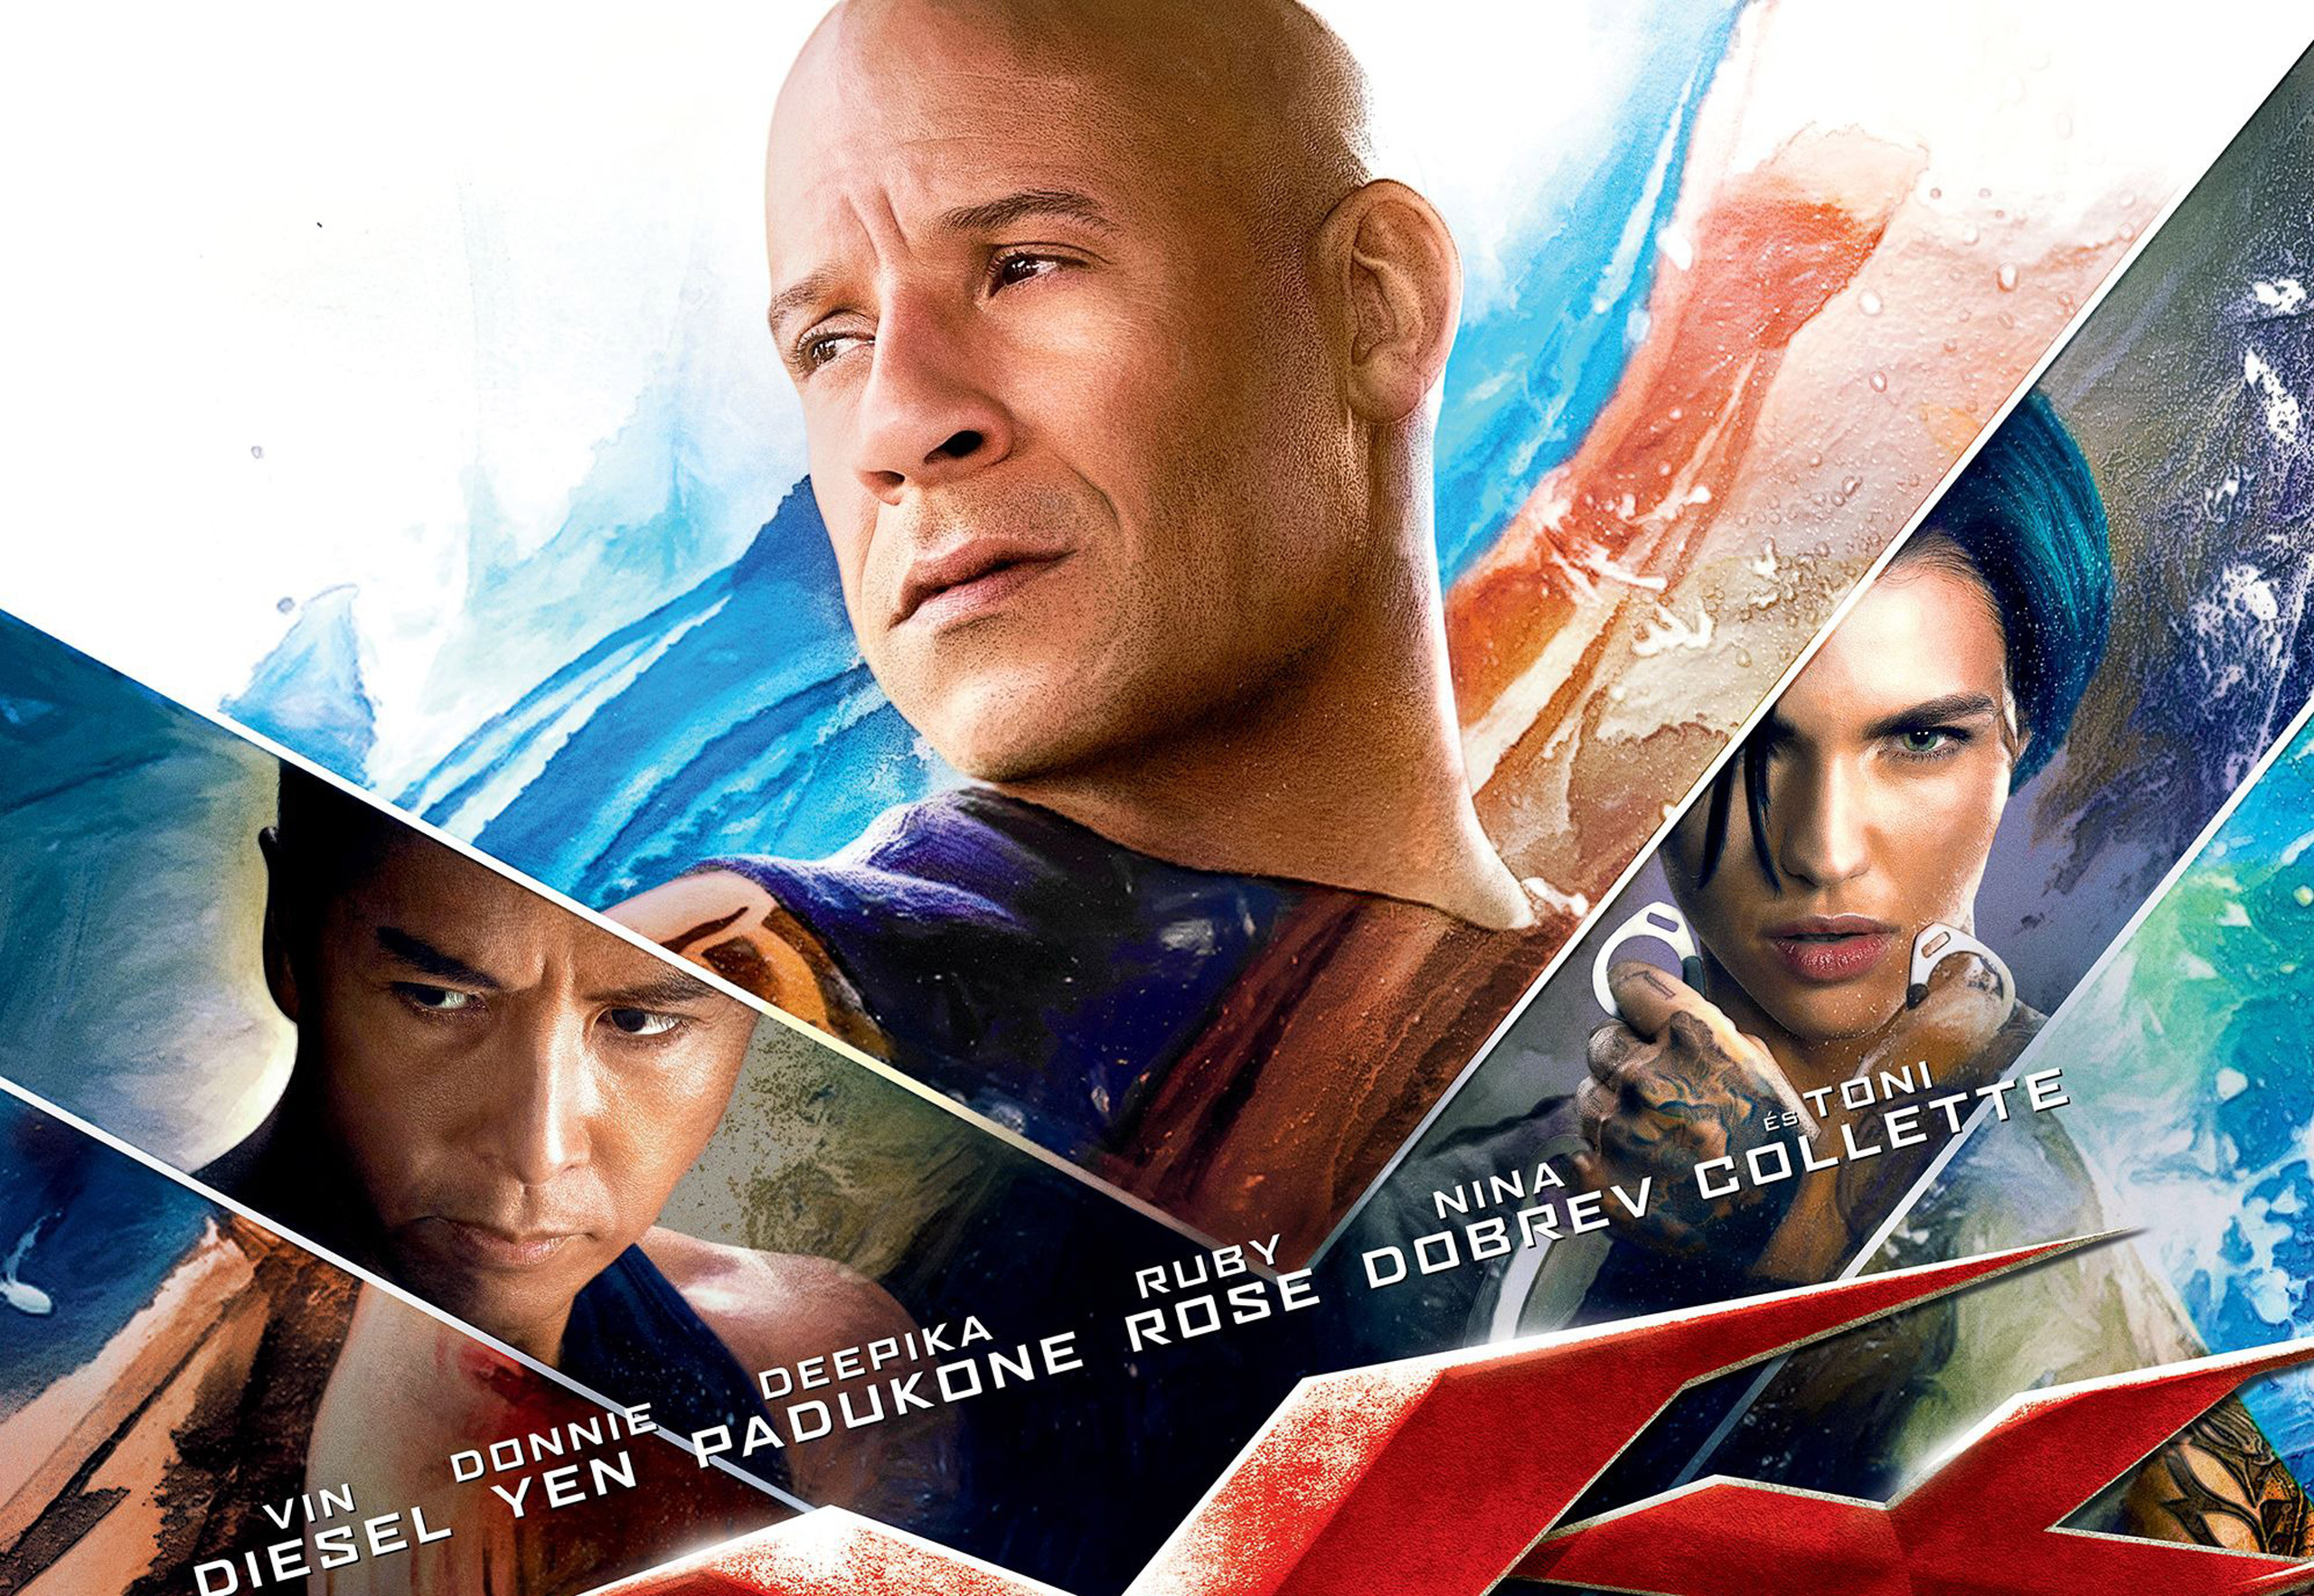 Xxx: Return Of Xander Cage Wallpapers